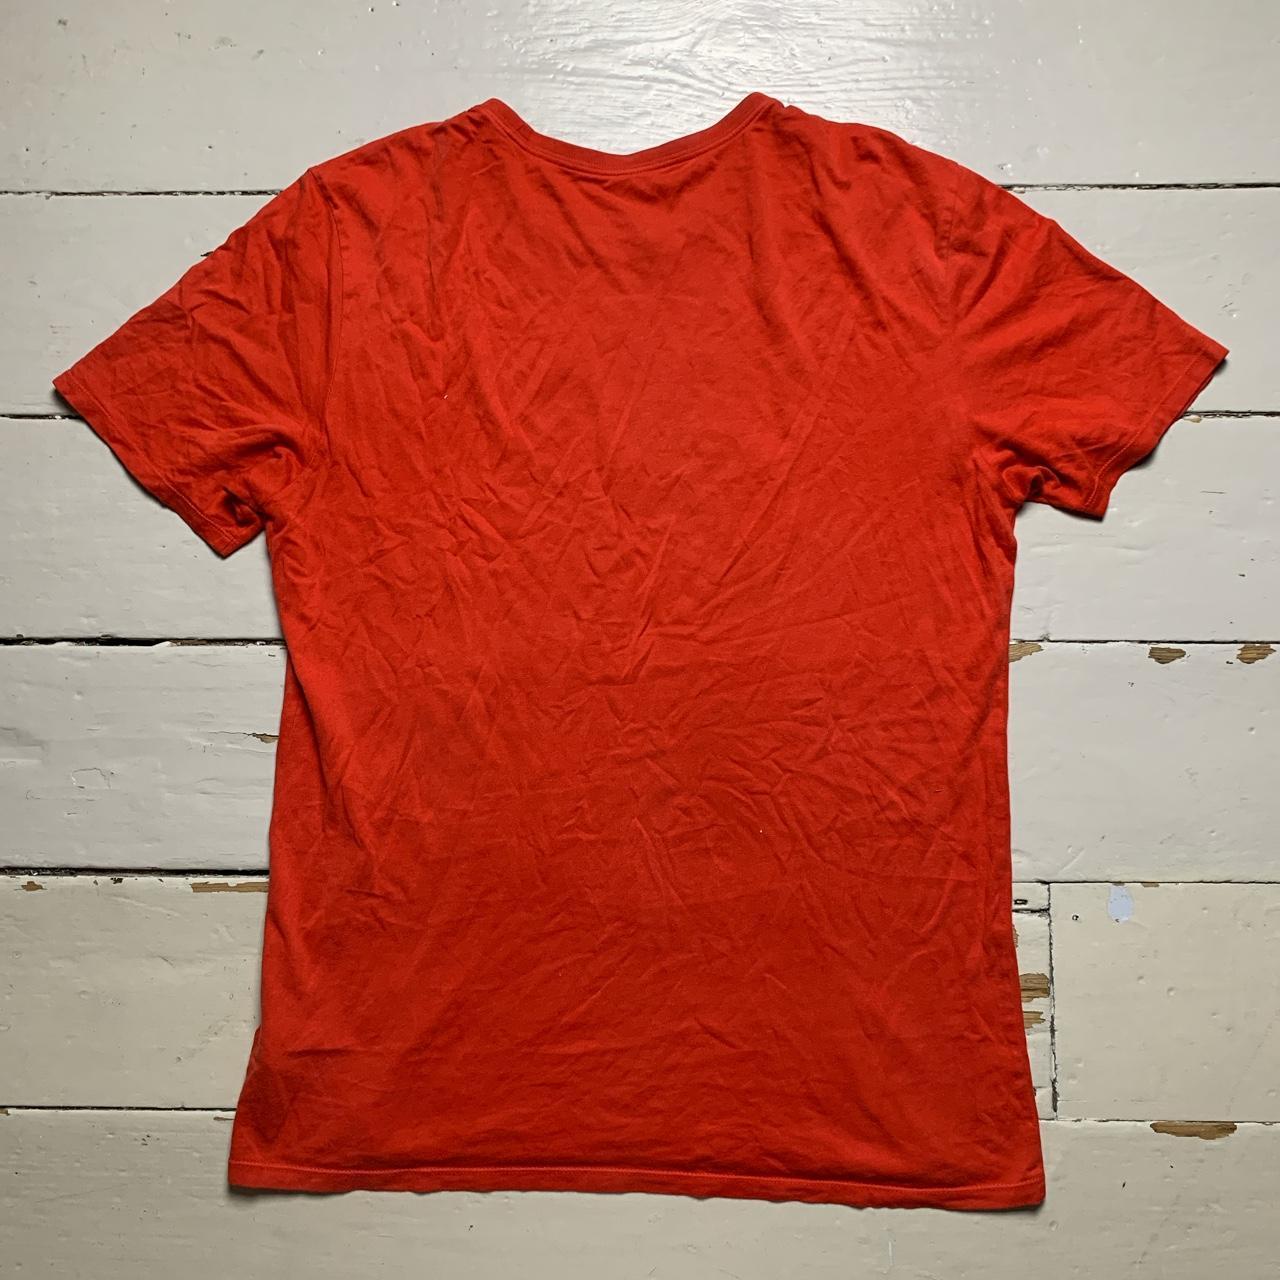 Nike Vintage Swoosh Red and White T Shirt